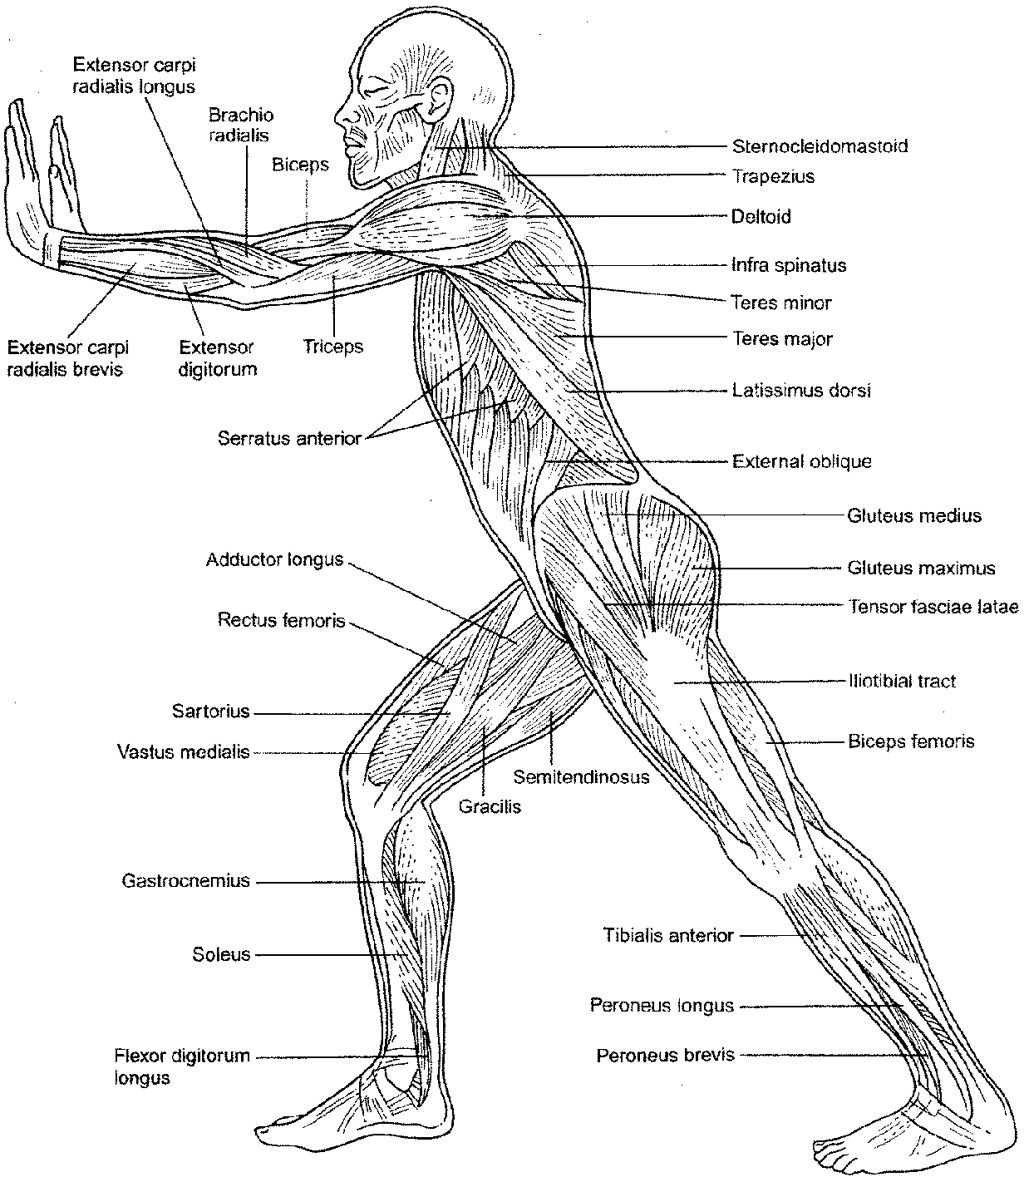 Anatomy Coloring Book Anatomy And Physiology Muscular System